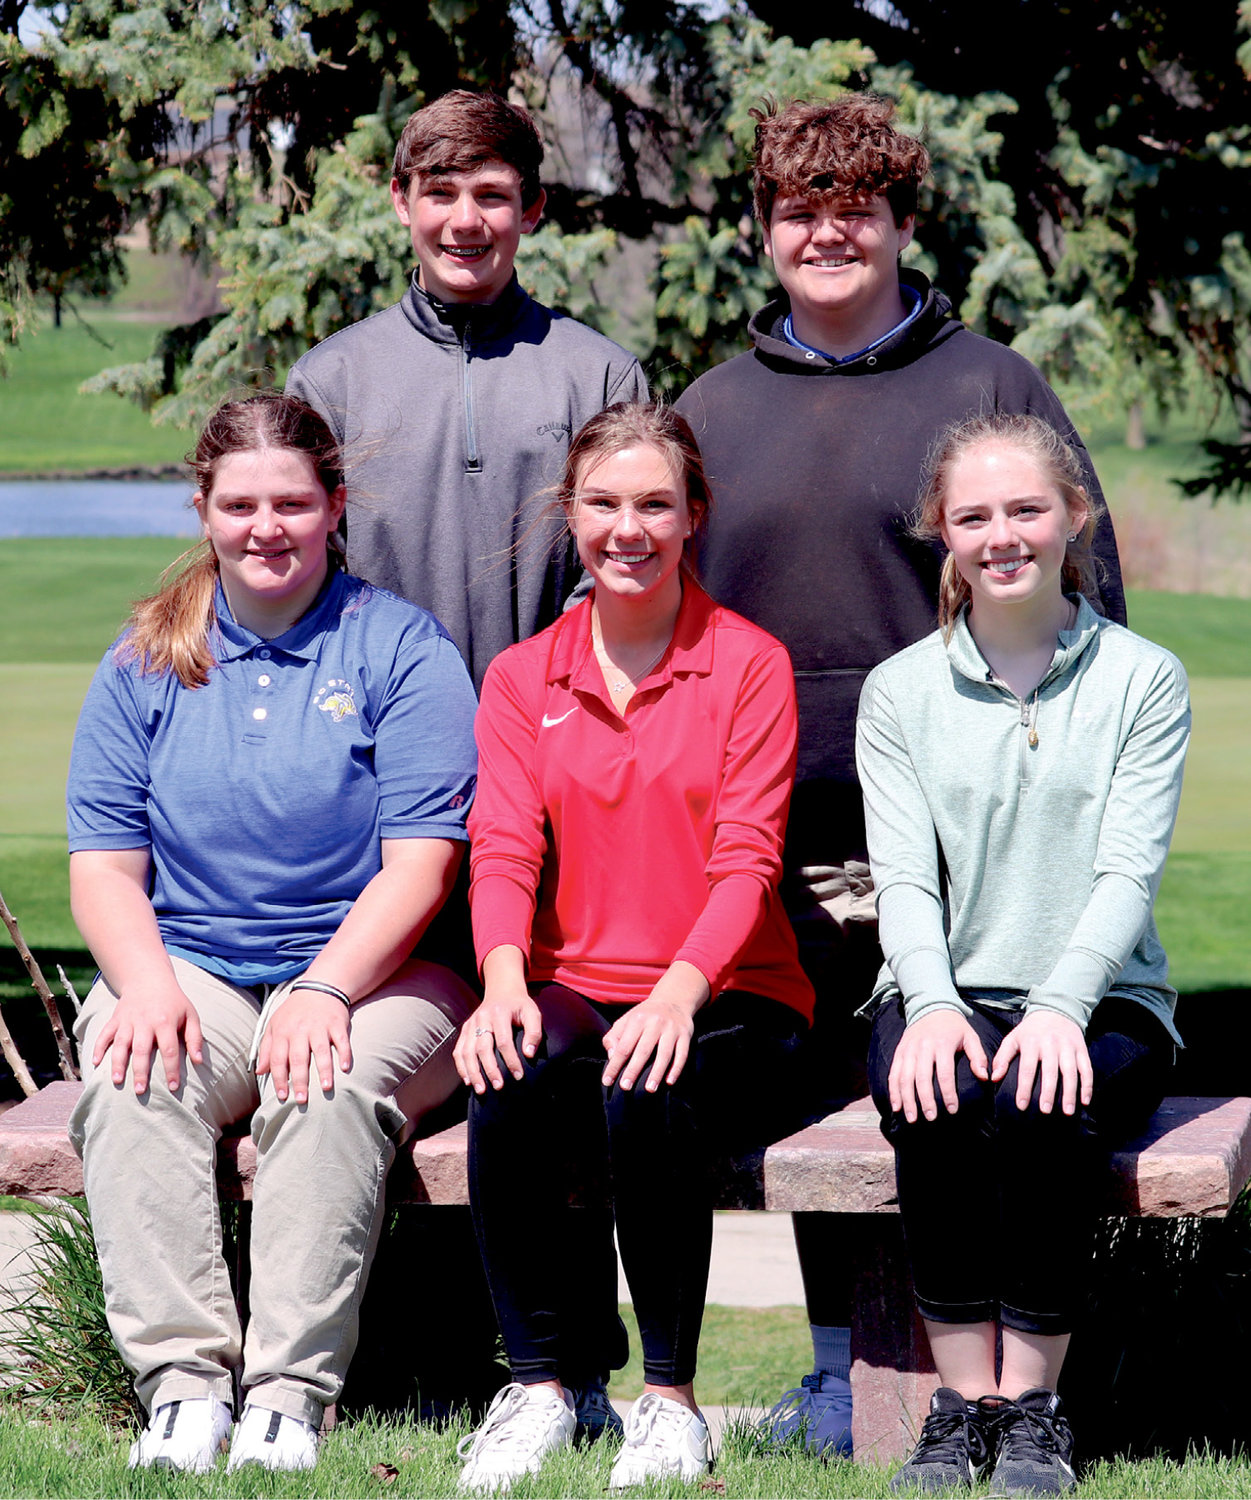 Varsity golfers representing Lake Preston at the DVC Tourney on Monday were Amelia Greene (seated left), Morgan Curd and Brooklyn Bothun.  Ben Curd (standing left) and Ryne Greene also competed.  Lone medalist was Morgan Curd with 12th place